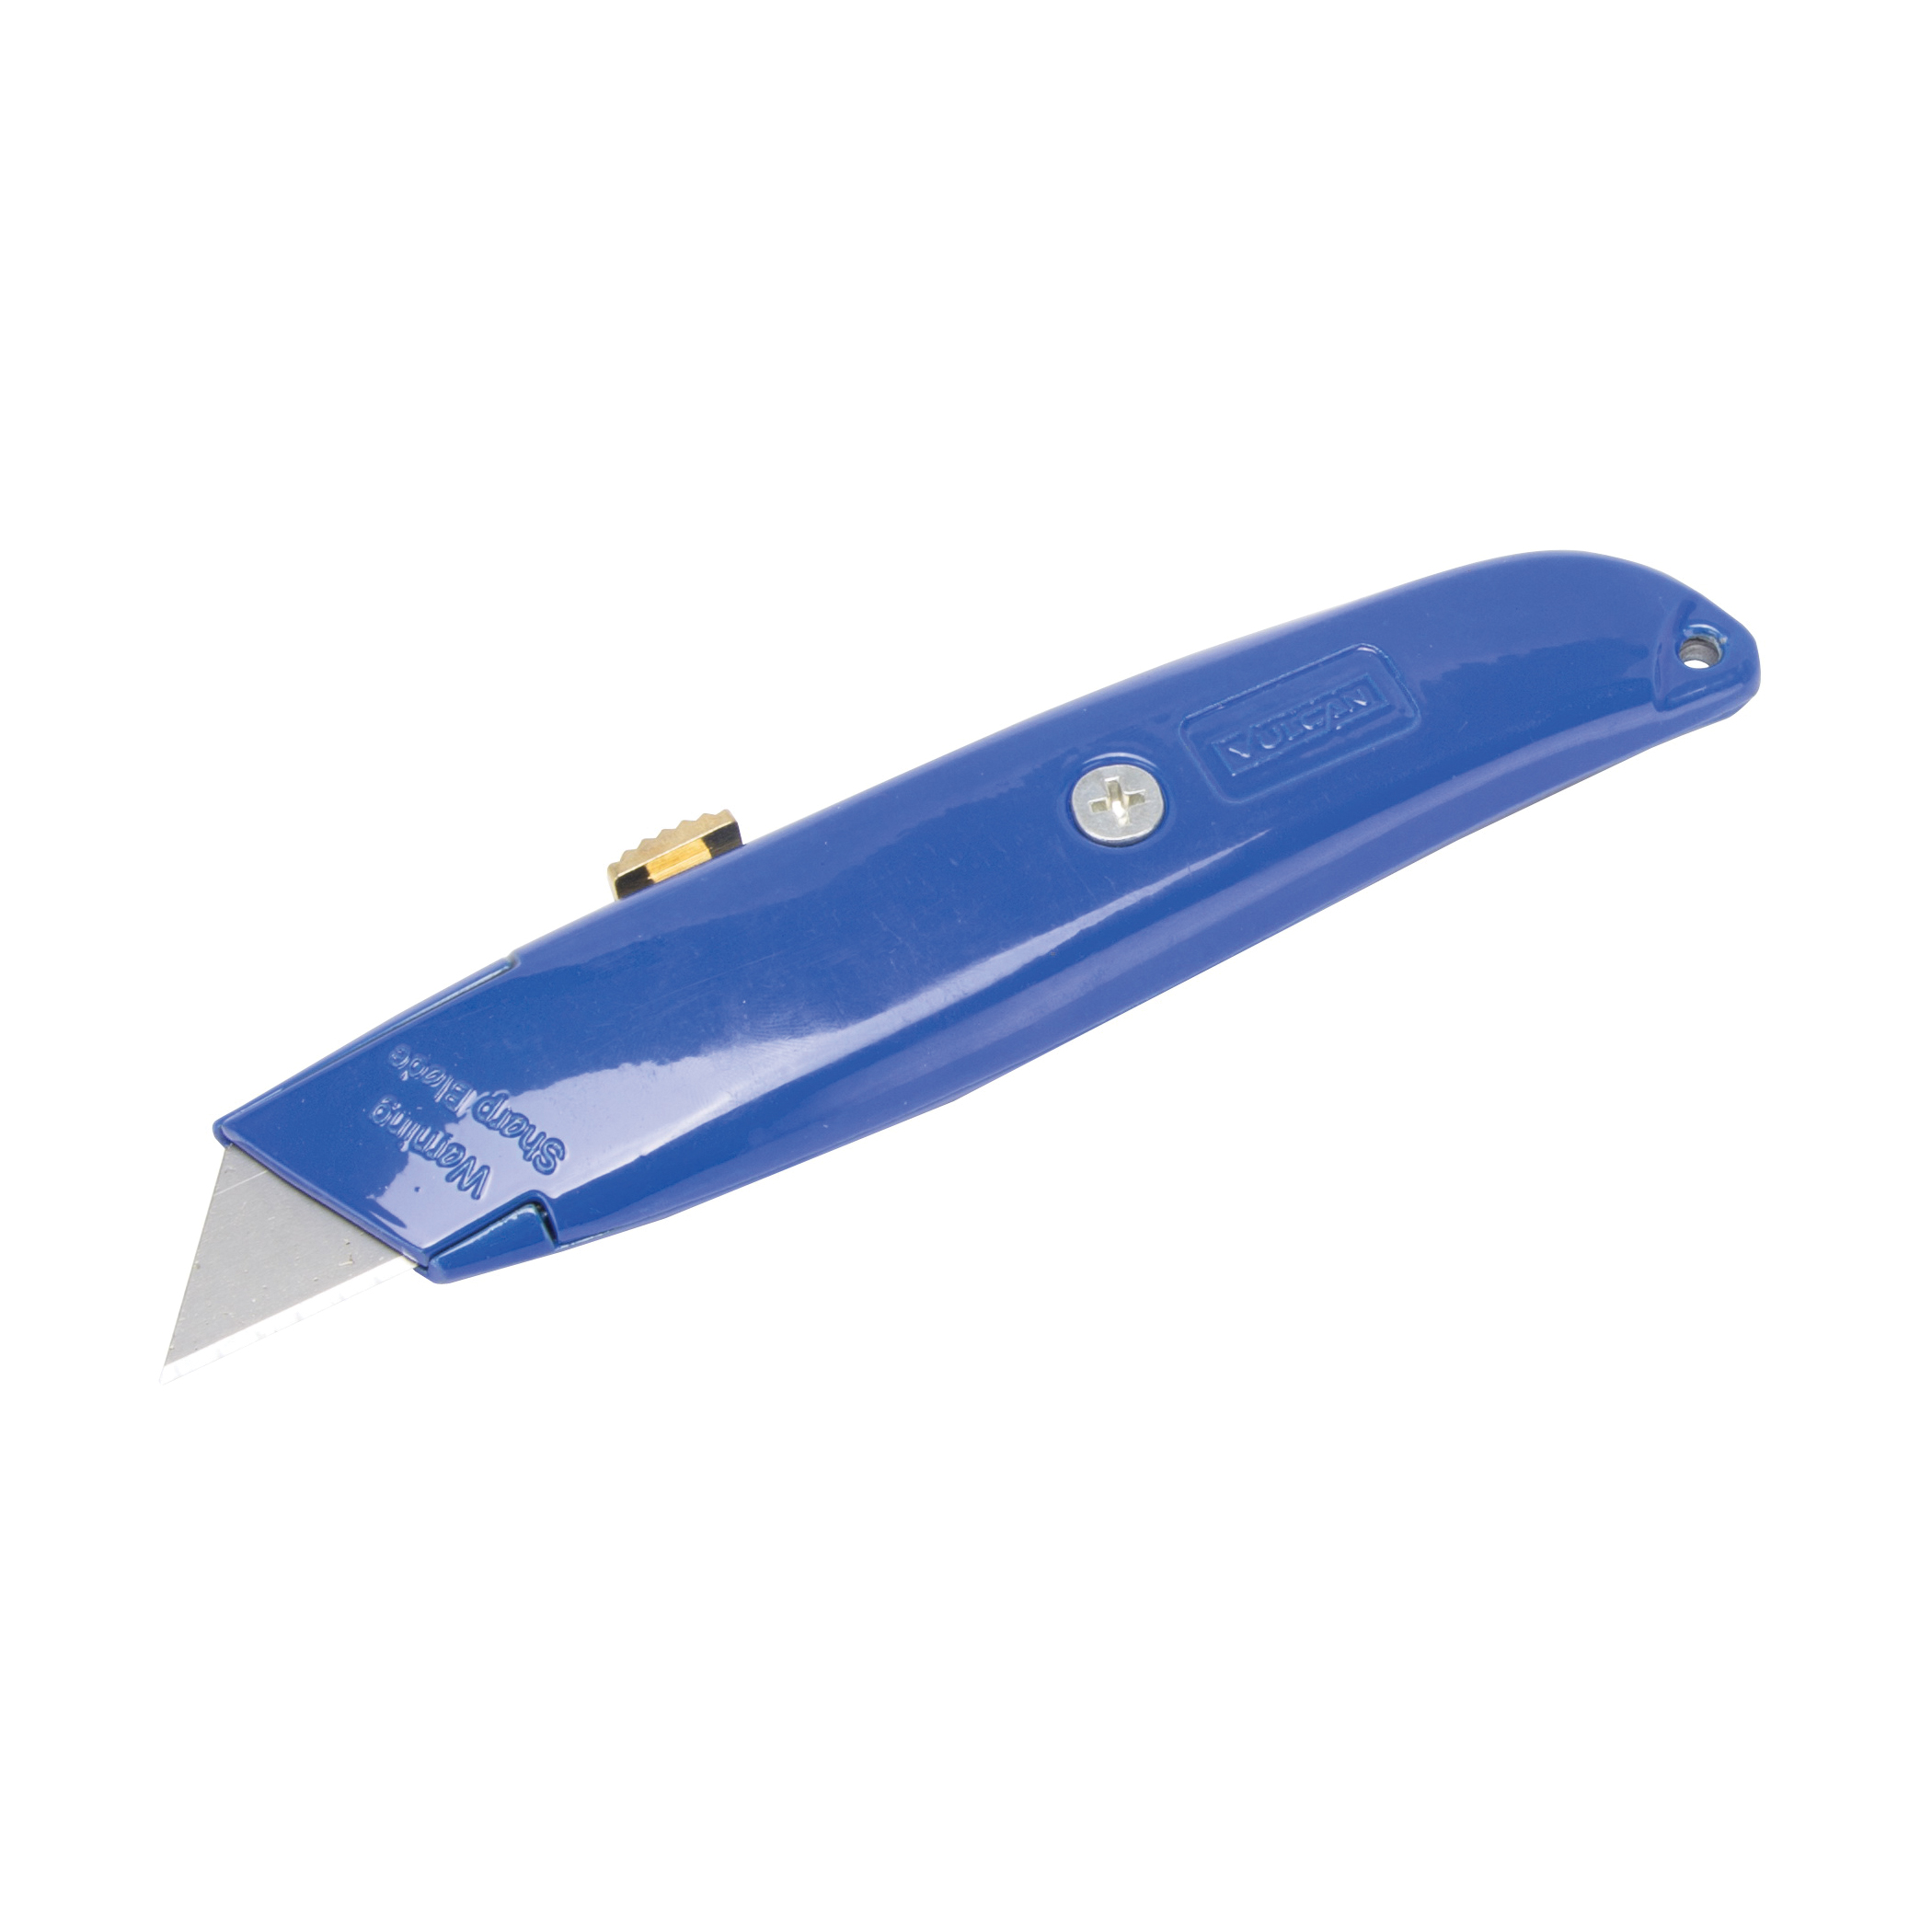 JL54217 Utility Knife, 2-7/8 in L Blade, 1-1/4 in W Blade, Aluminum Handle, Blue Handle